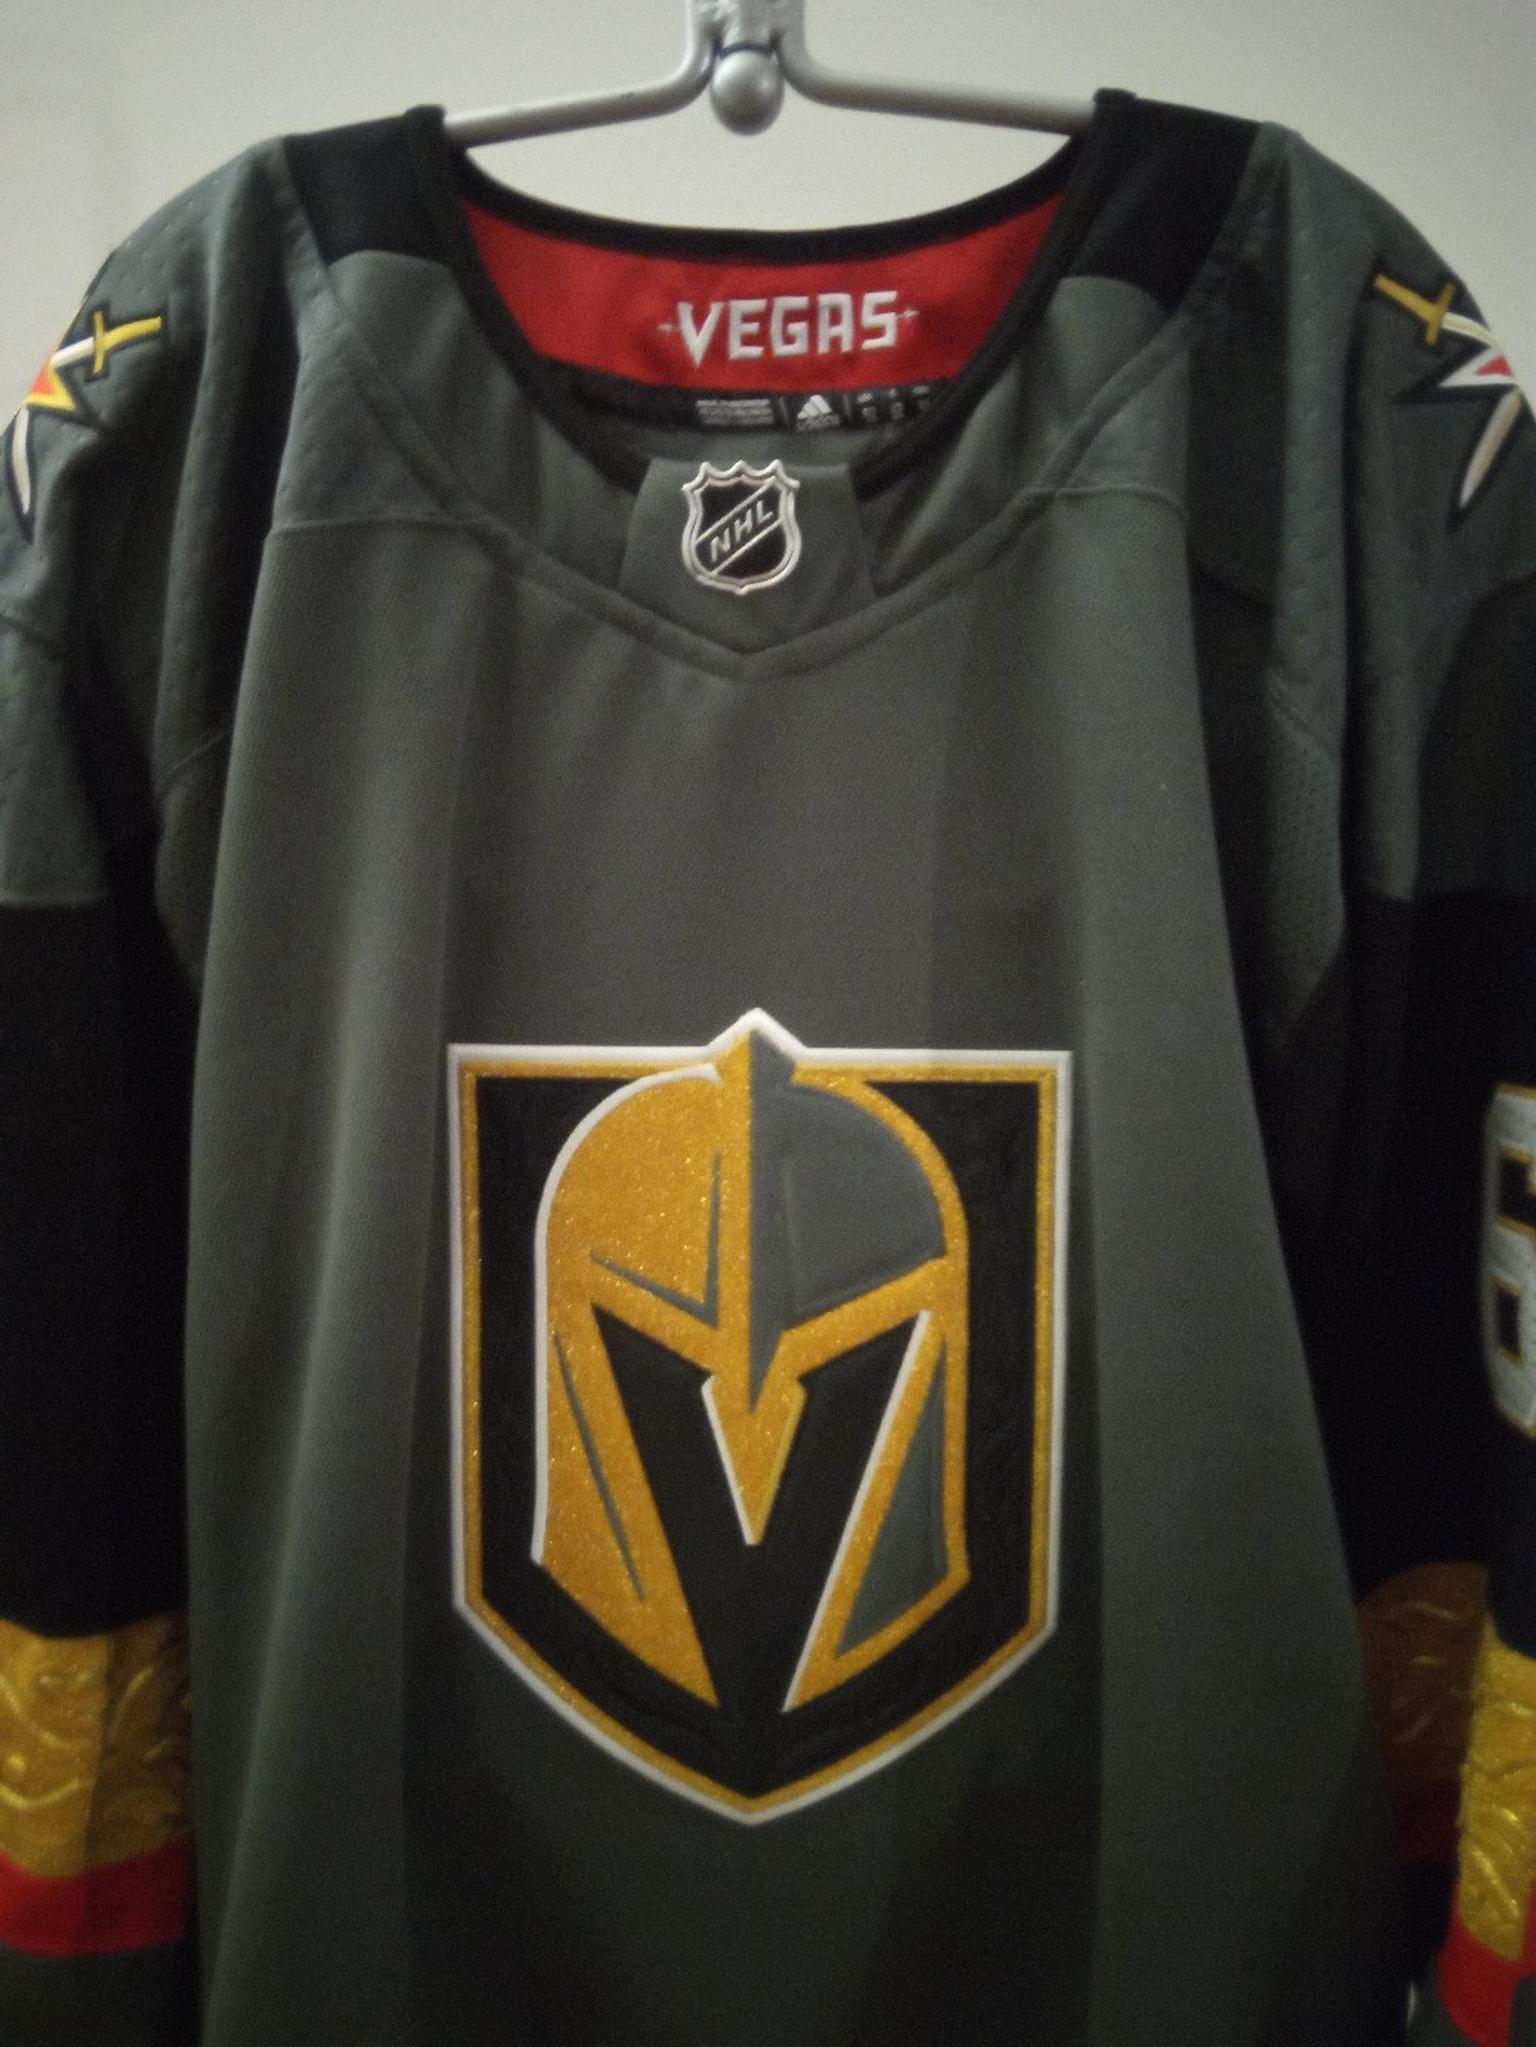 Vegas Golden Knights 67pacioretty Nhl Trikot In 9920 Sillian For 75 00 For Sale Shpock